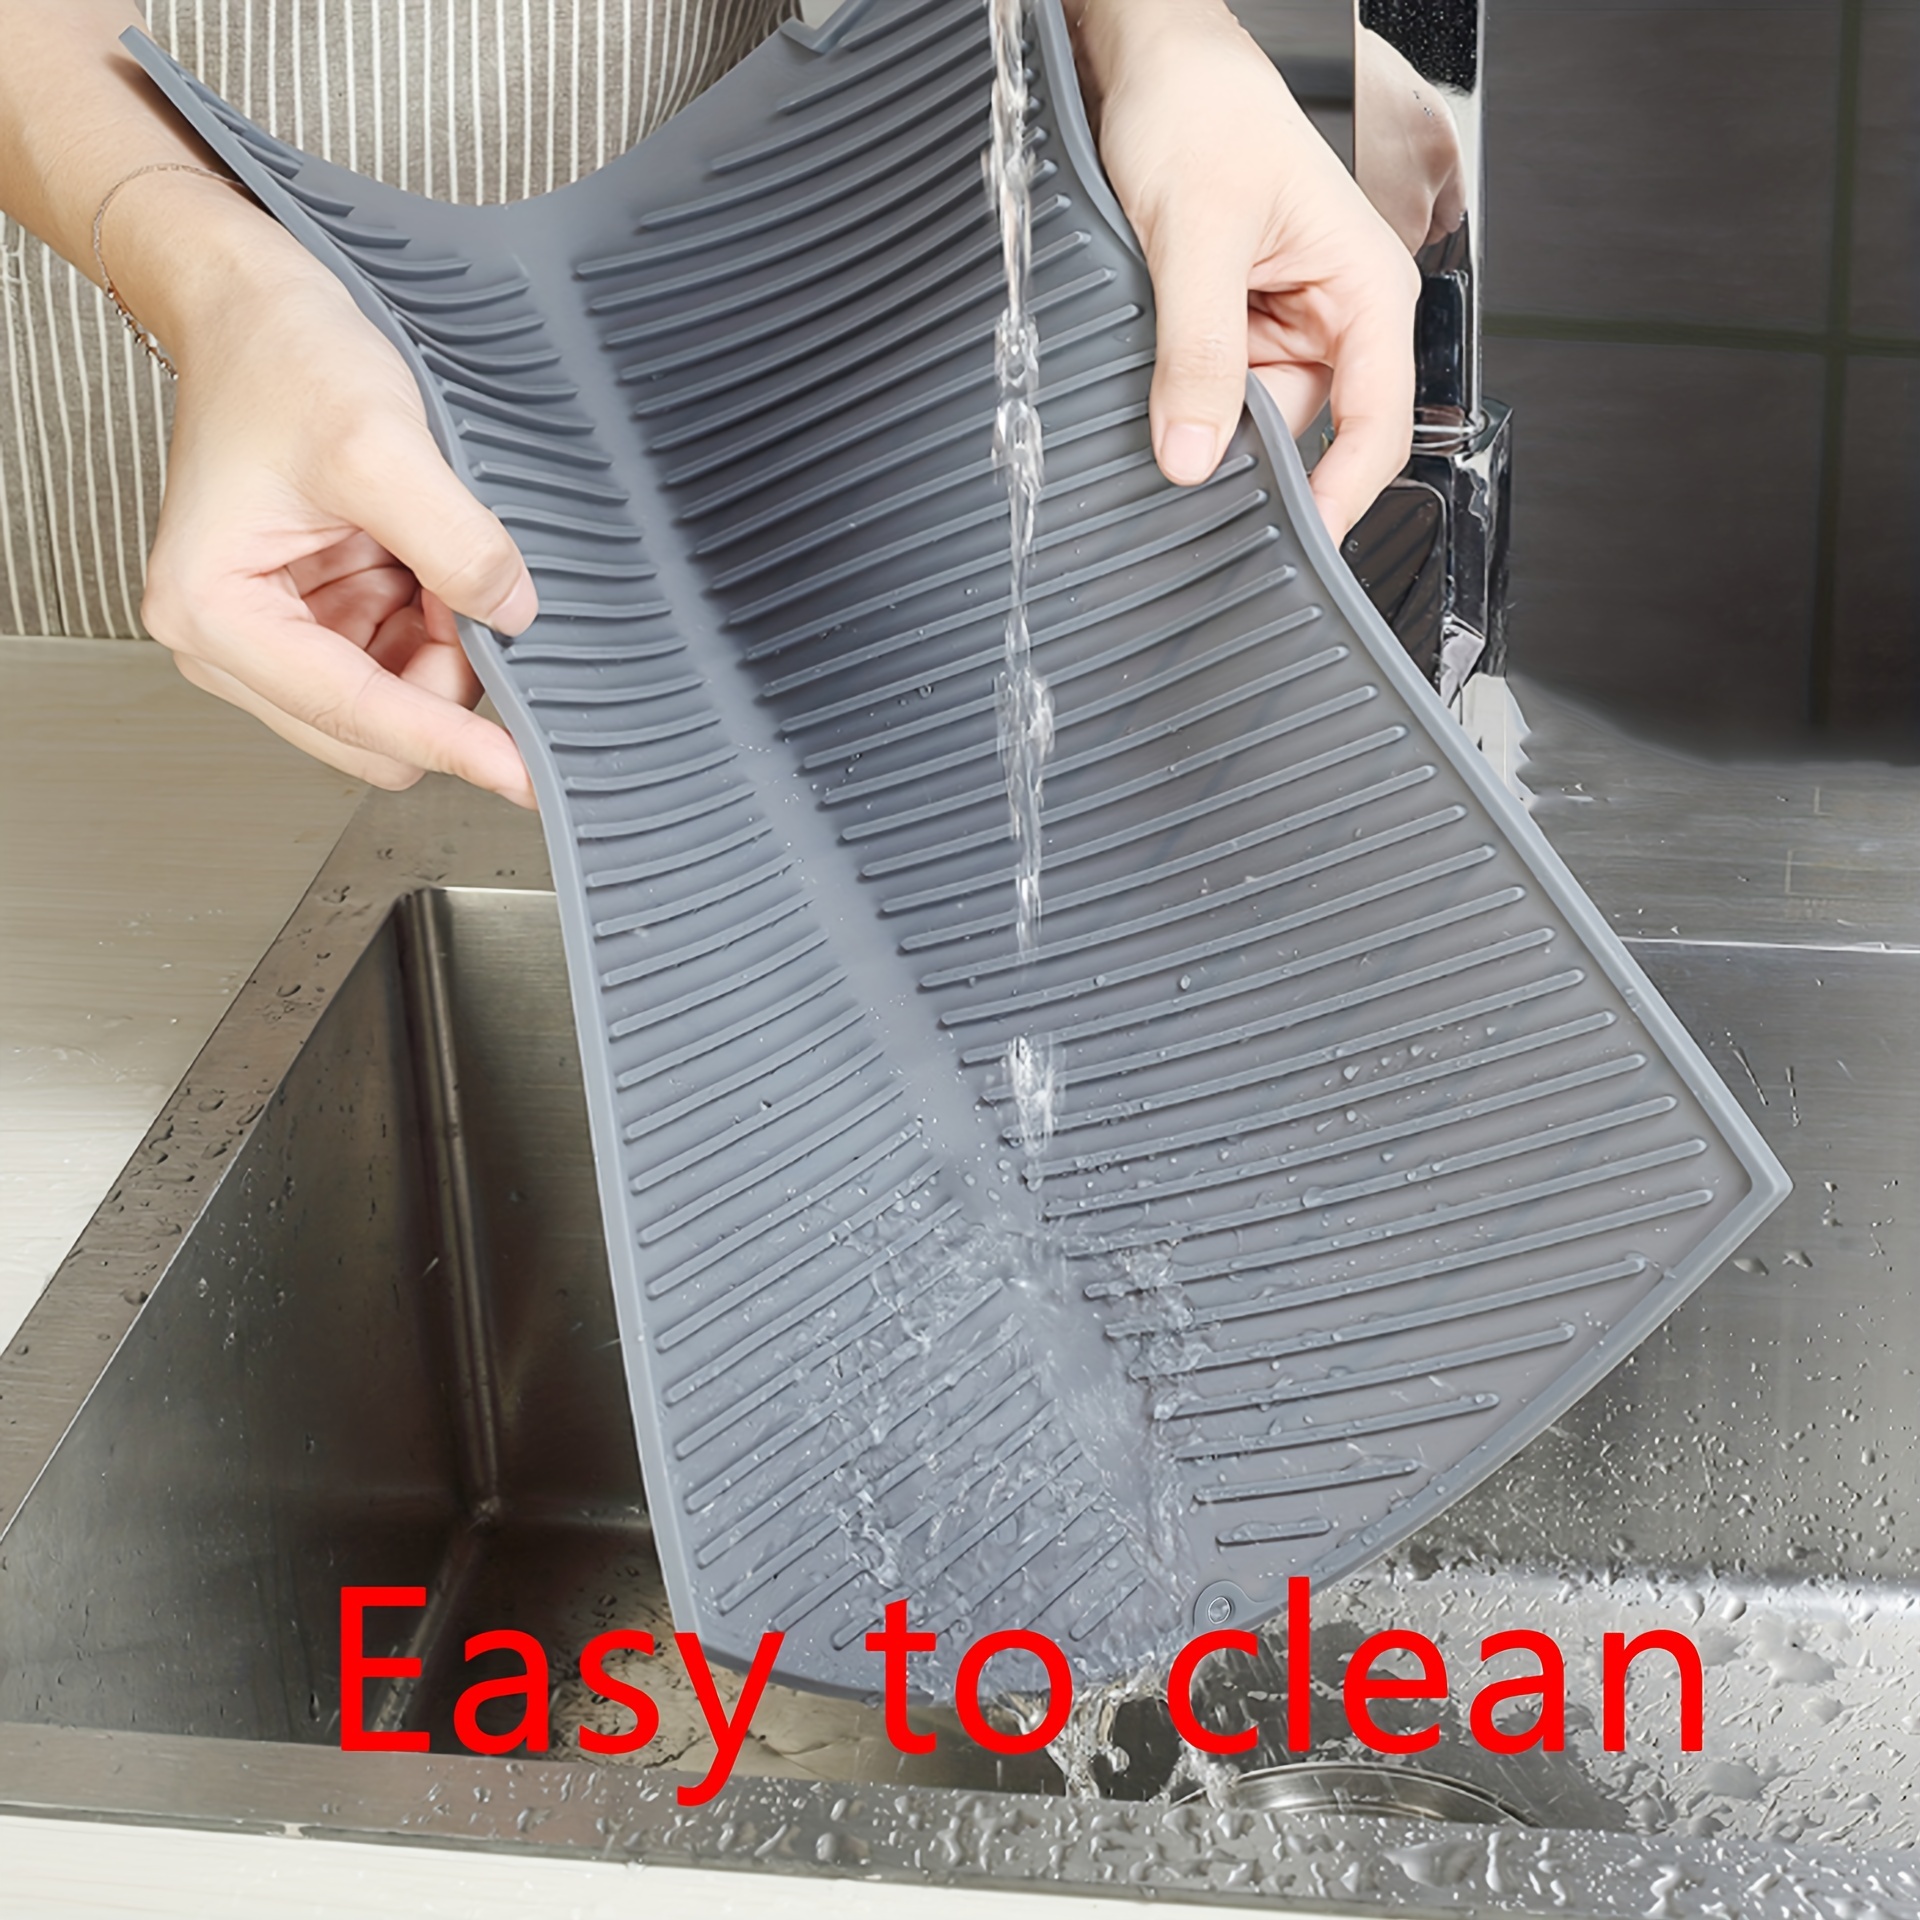 Foldable Dish Drying Mat Heat Insulation Kitchen Sink Mat Tableware Pad  with Draining Rack Detachable Pot Lid Draining Placemat - AliExpress